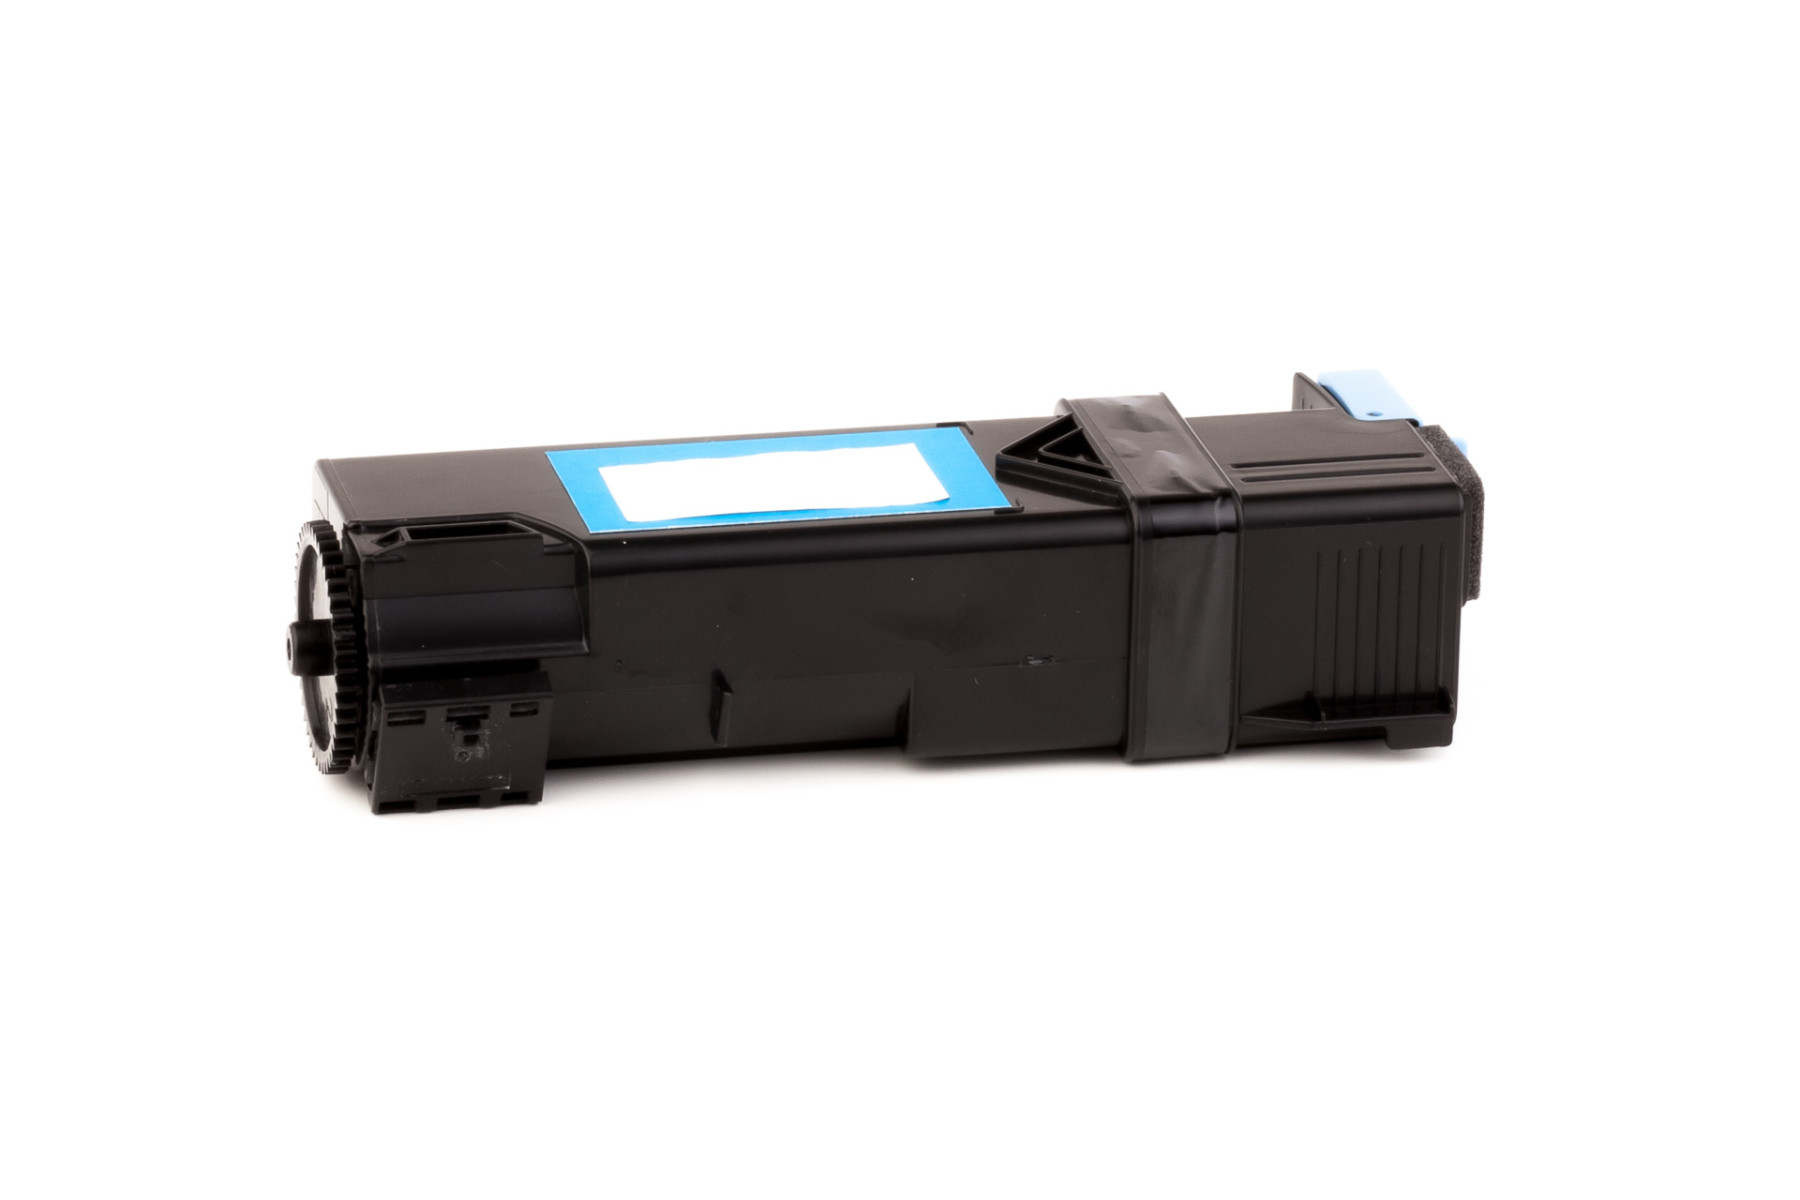 Set consisting of Toner cartridge (alternative) compatible with Xerox Phaser 6140 / 6140 DN / 6140 N black, cyan, magenta, yellow - Save 6%